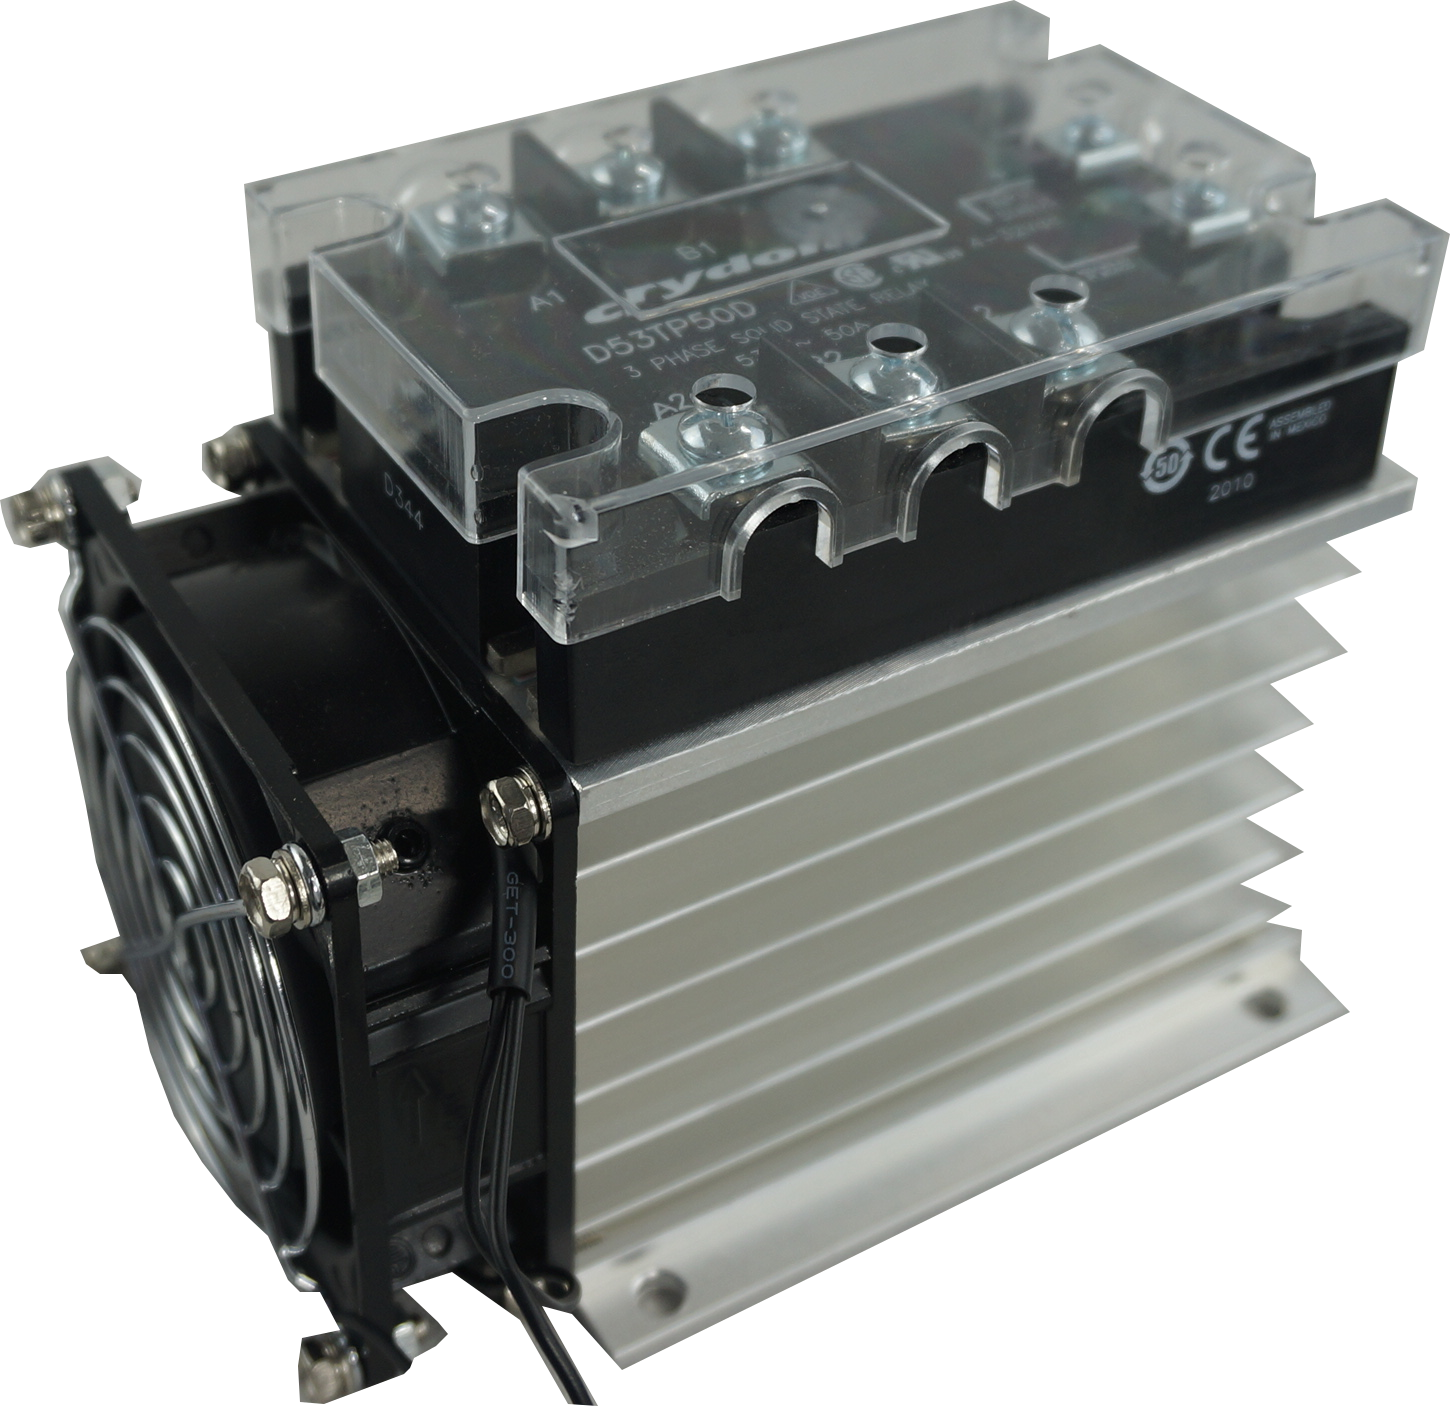 D53TP50D + HS212F, Solid State Relay, and Heatsink Assembly, 3 Phase 3-32VDC Control, 36 Amp per phase @ 40 Deg C, 48-530VAC Load, LED Status Indicator